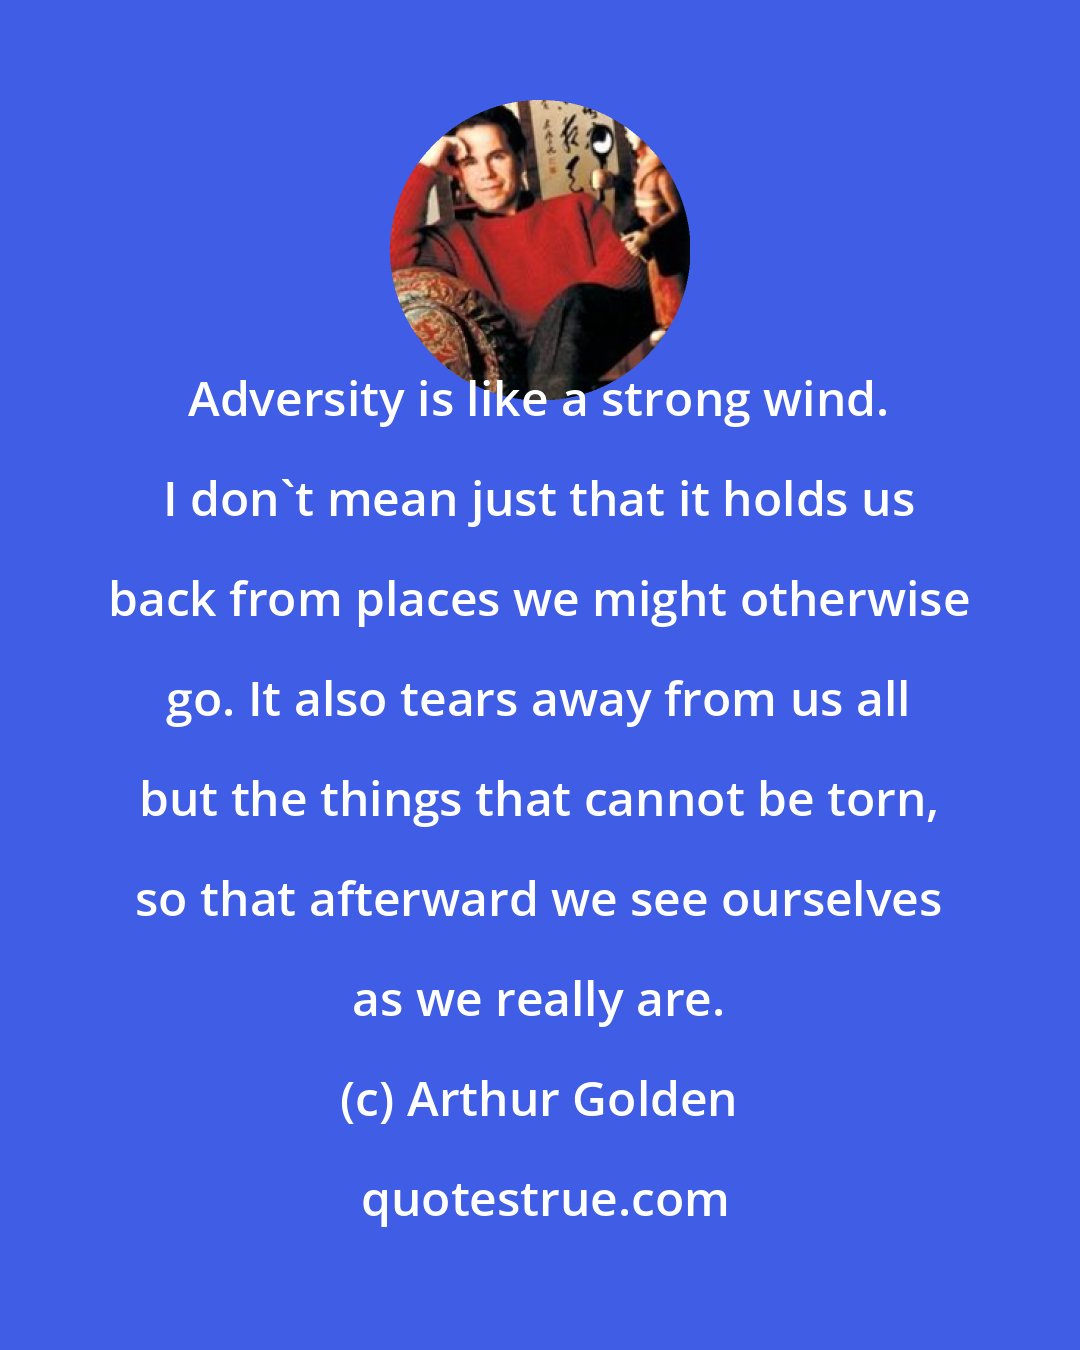 Arthur Golden: Adversity is like a strong wind. I don't mean just that it holds us back from places we might otherwise go. It also tears away from us all but the things that cannot be torn, so that afterward we see ourselves as we really are.